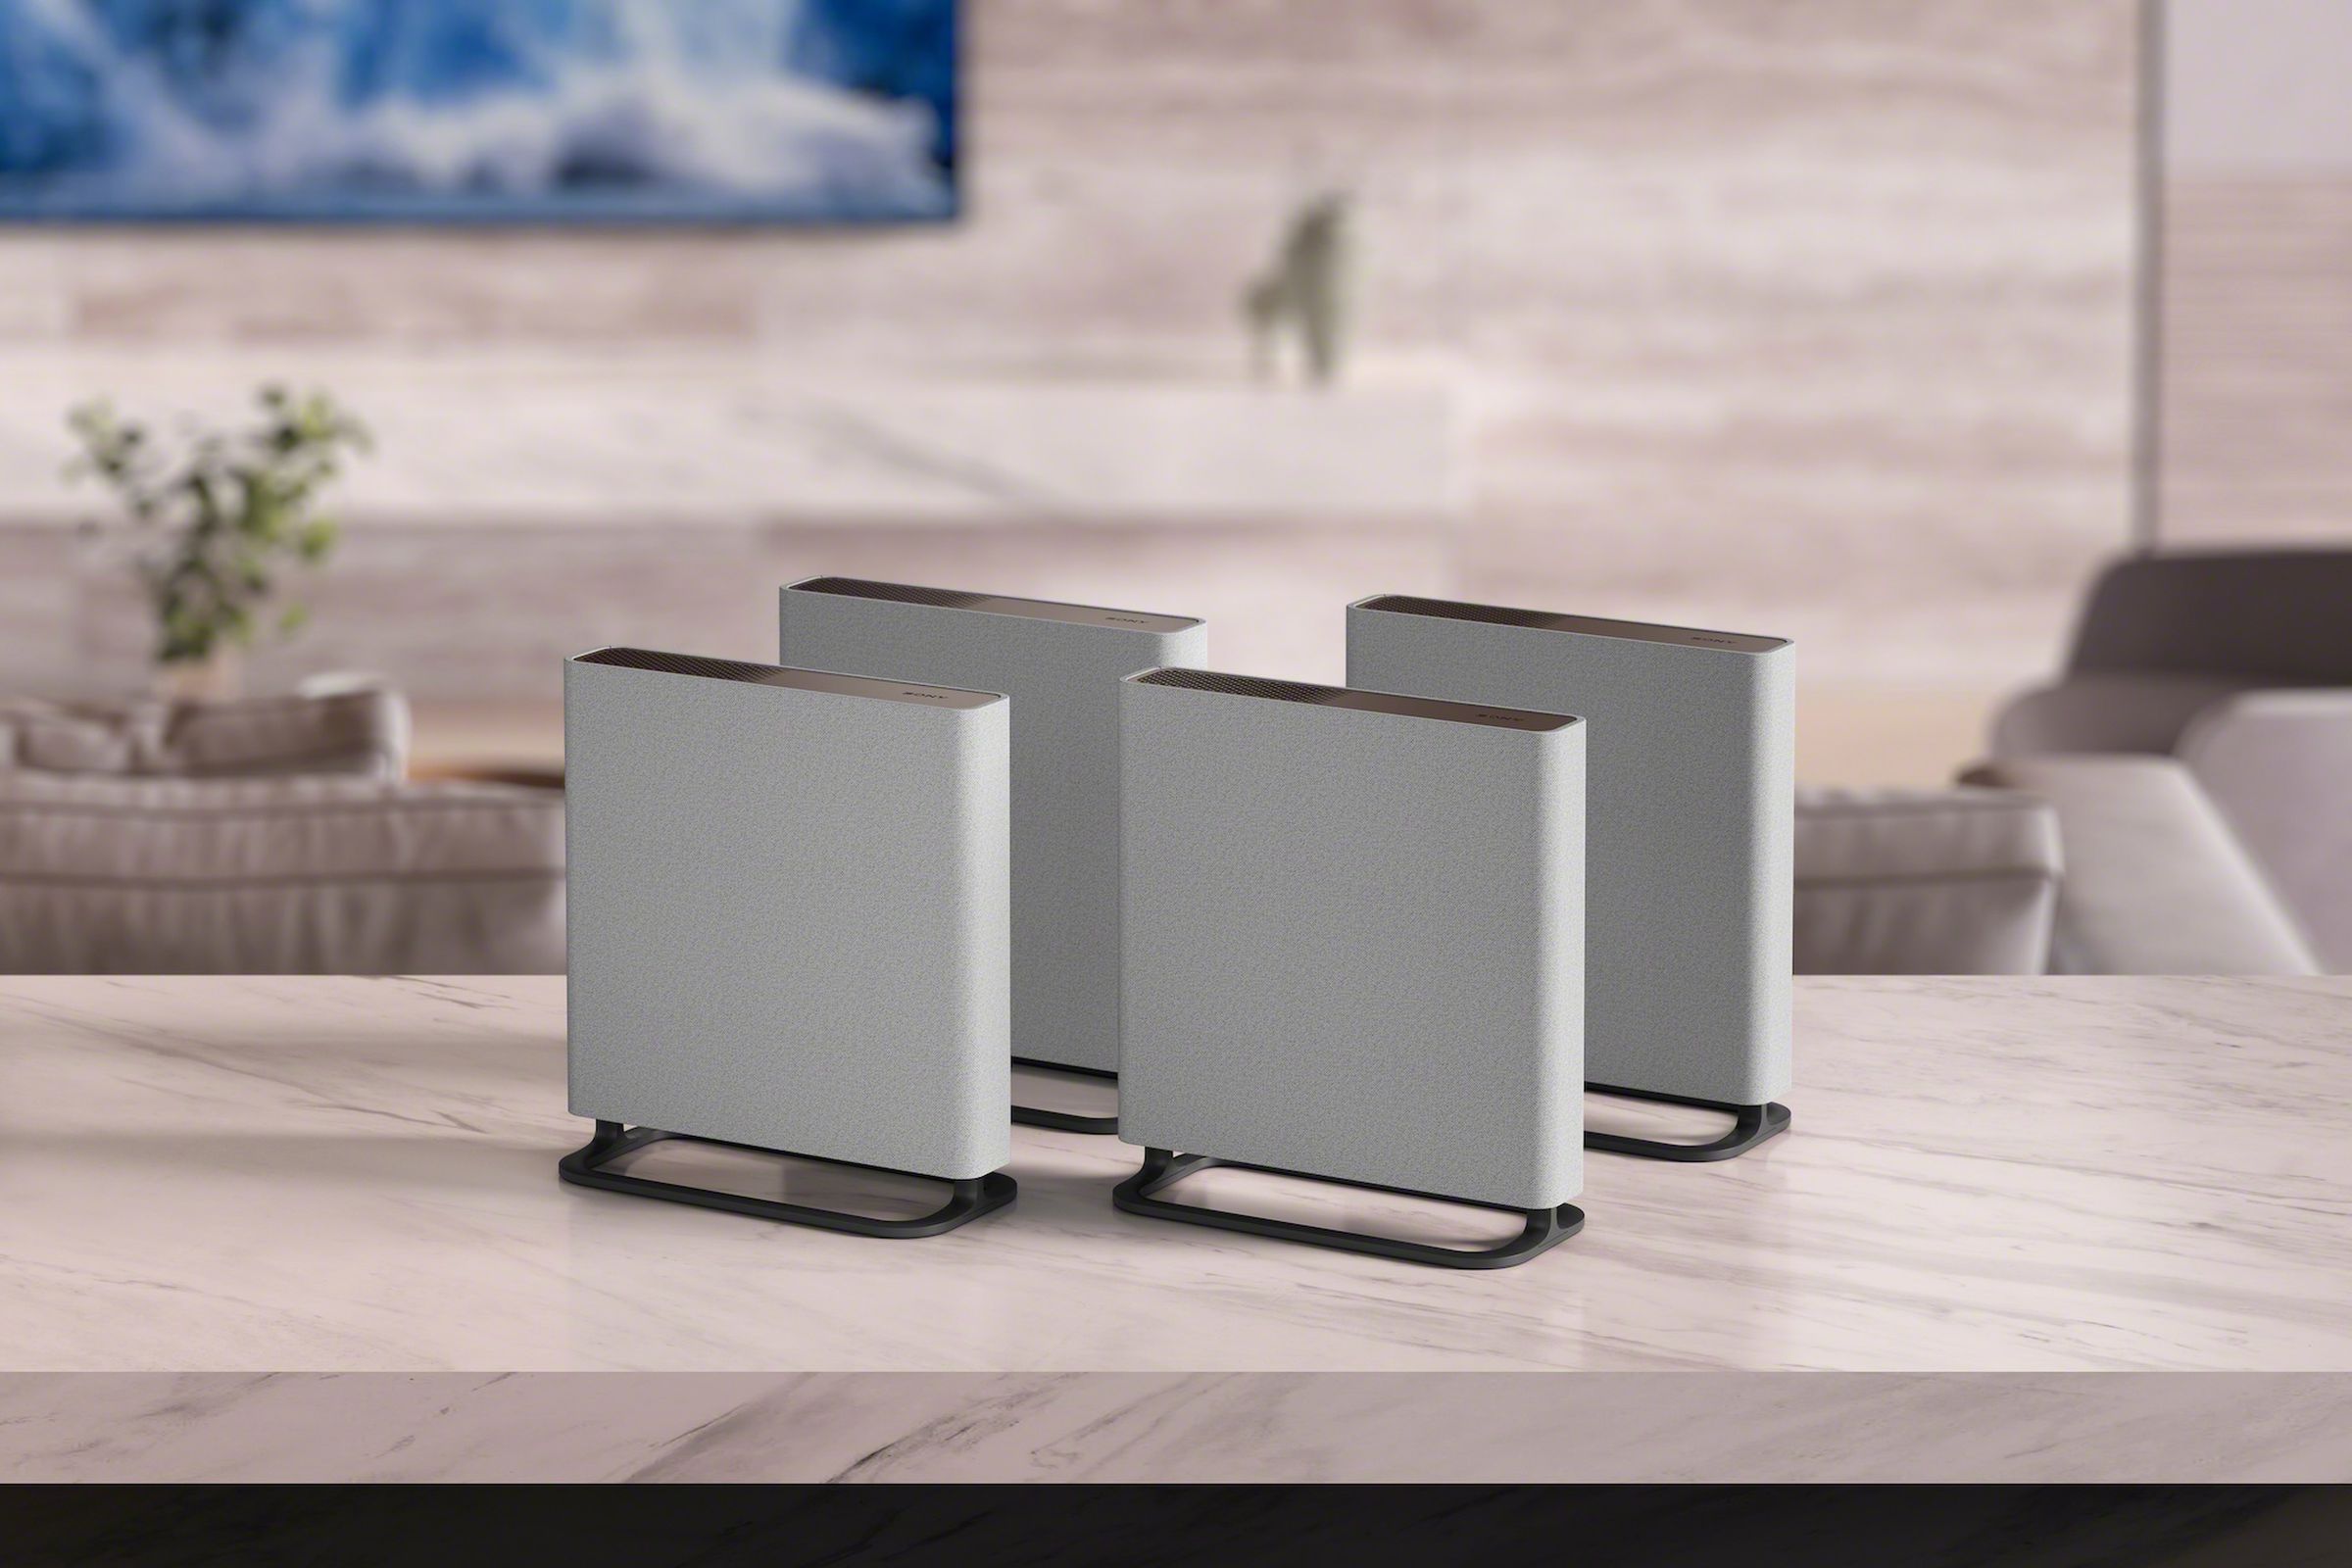 A marketing image of Sony’s Bravia Theater: Quad speaker system.